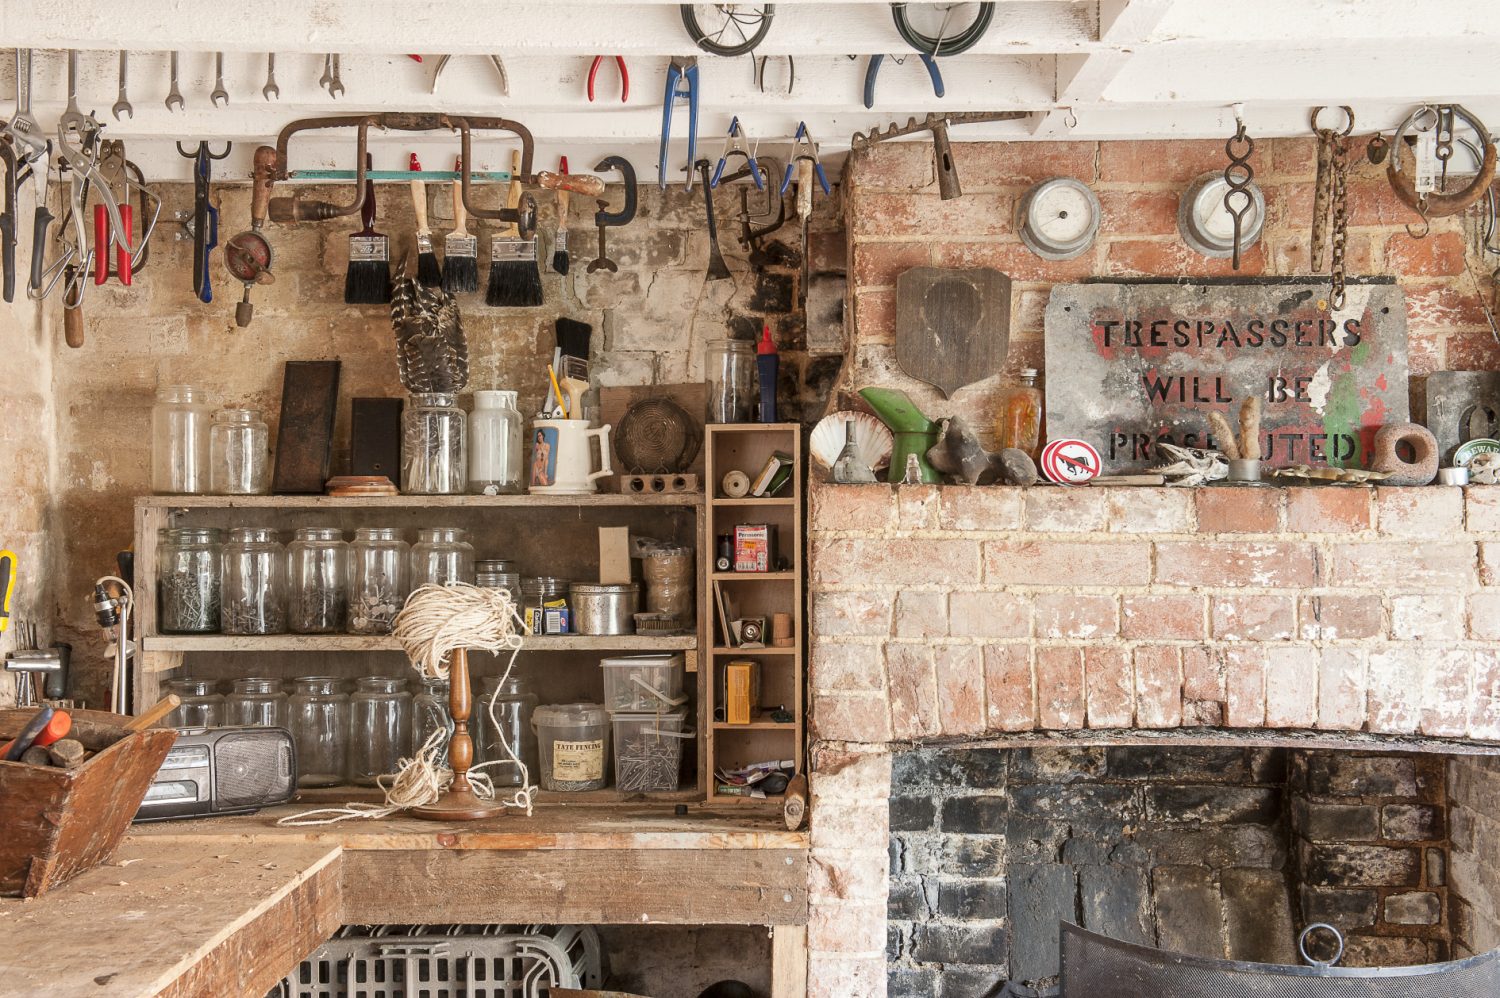 Nick’s outbuilding is crammed with vintage tools